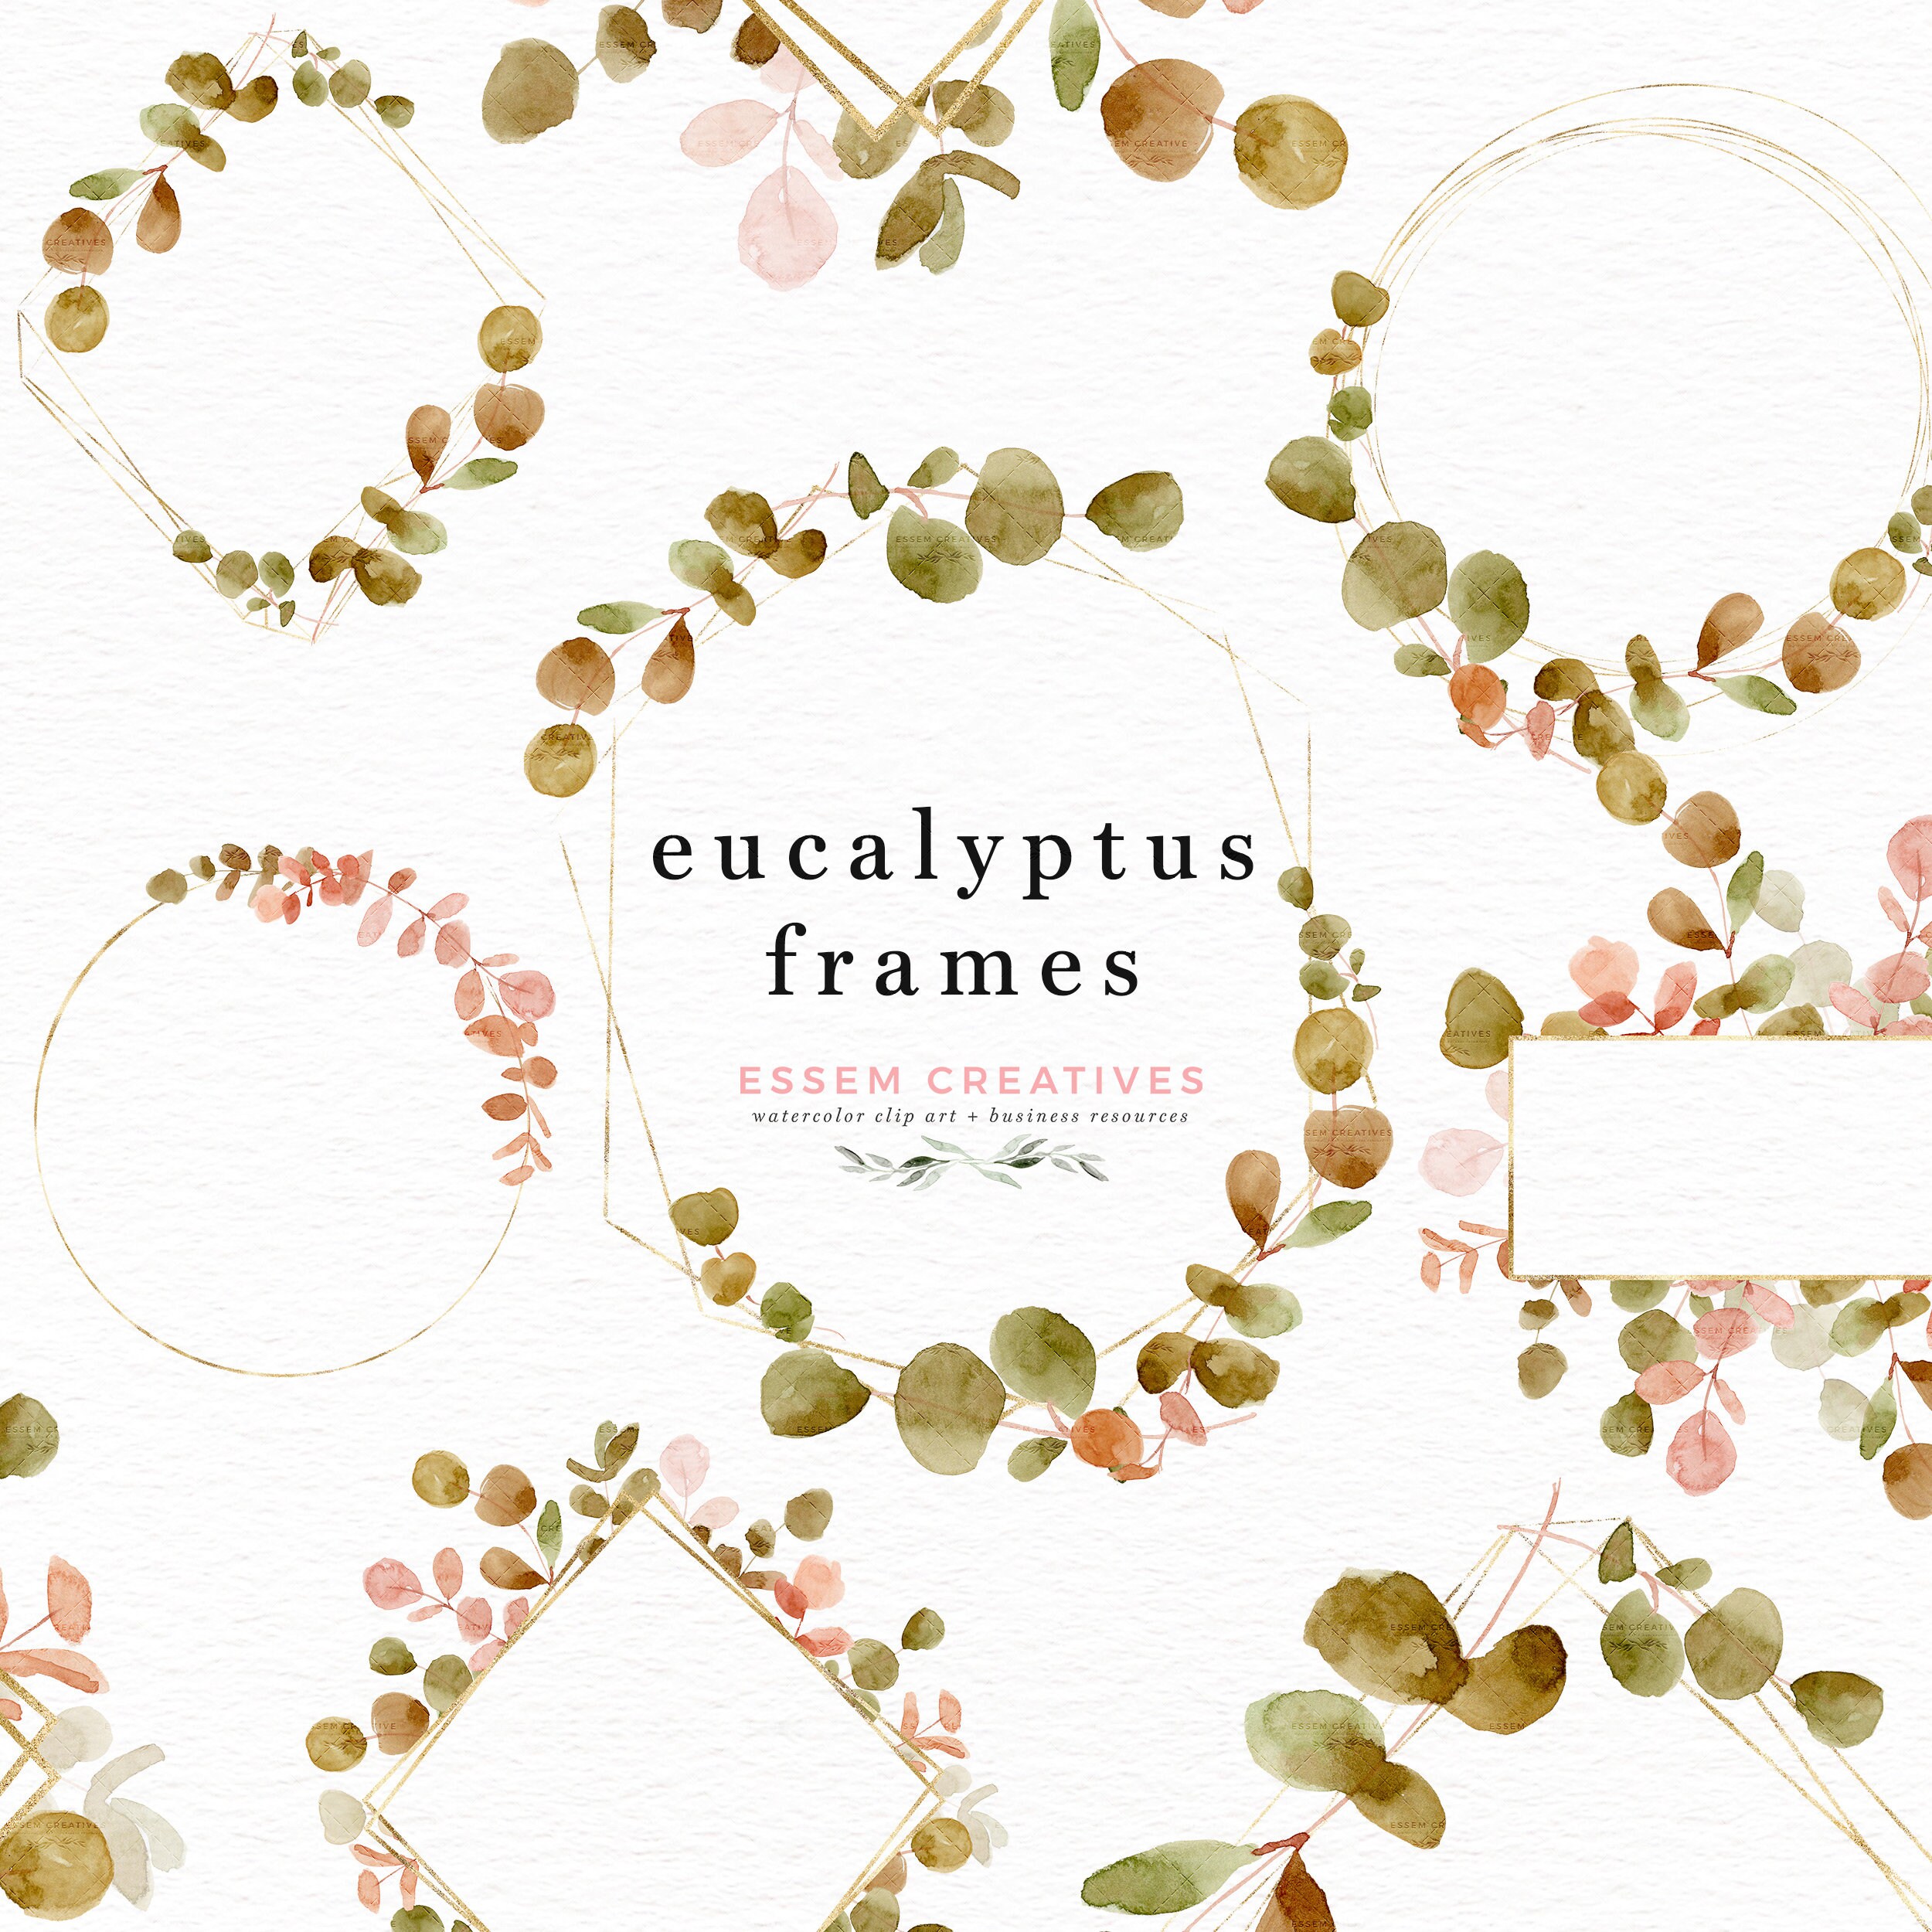 Watercolor Eucalyptus and Gold Leaves Wreath Frame Border Clipart with  Transparent Backgrounds for Invitations Logo Branding - Essem Creatives